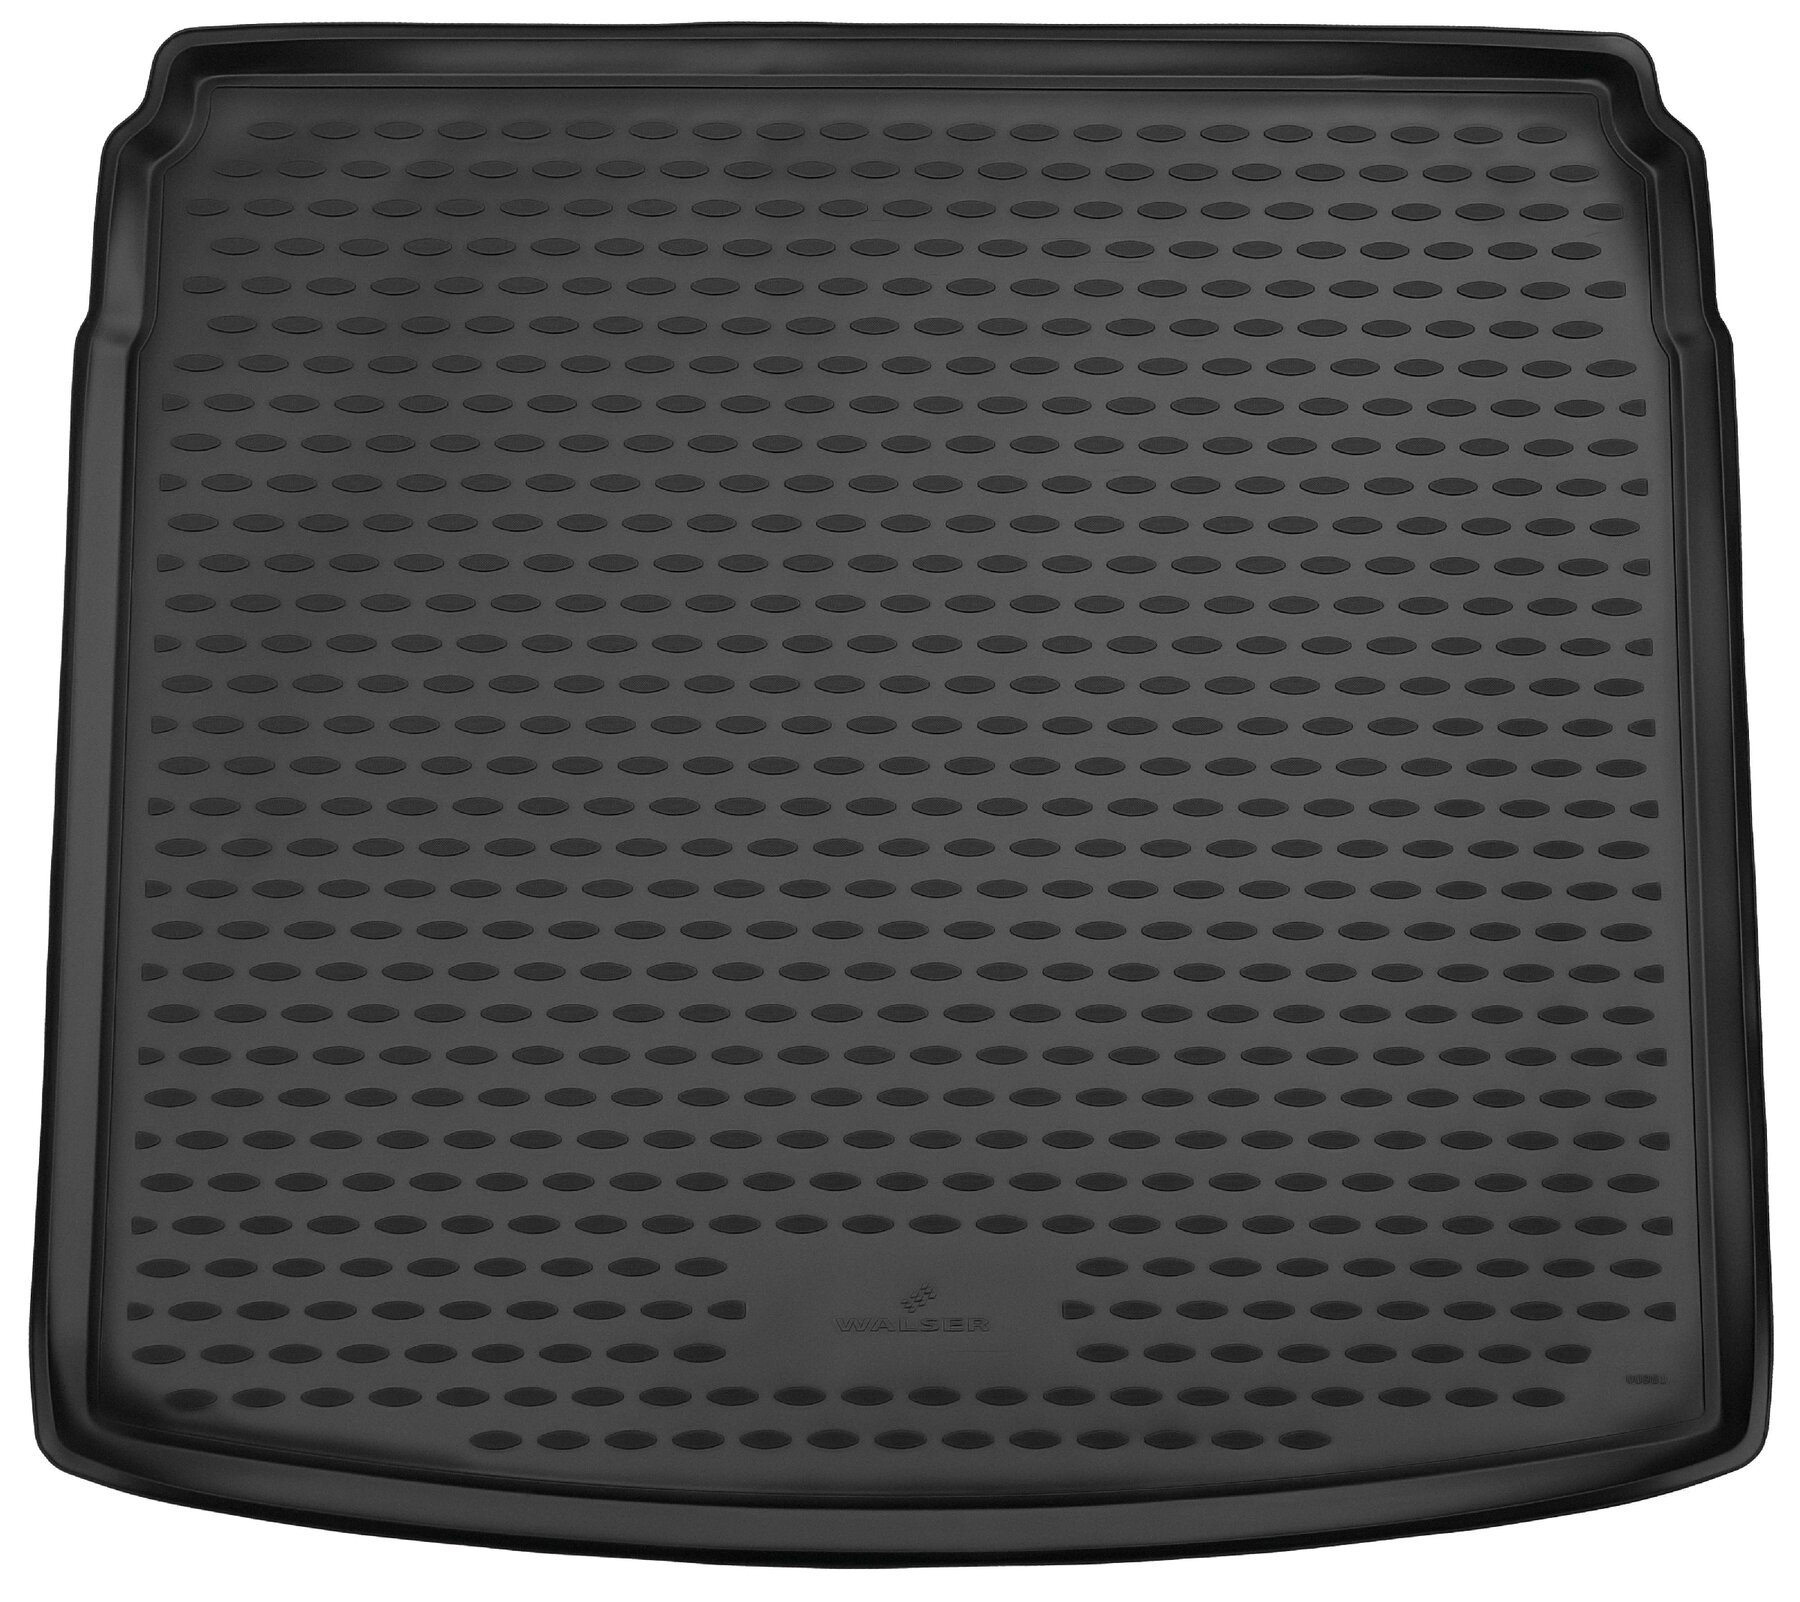 XTR Boot Mat for VW Tiguan Allspace 5 seats 2017-Today, lower loading floor